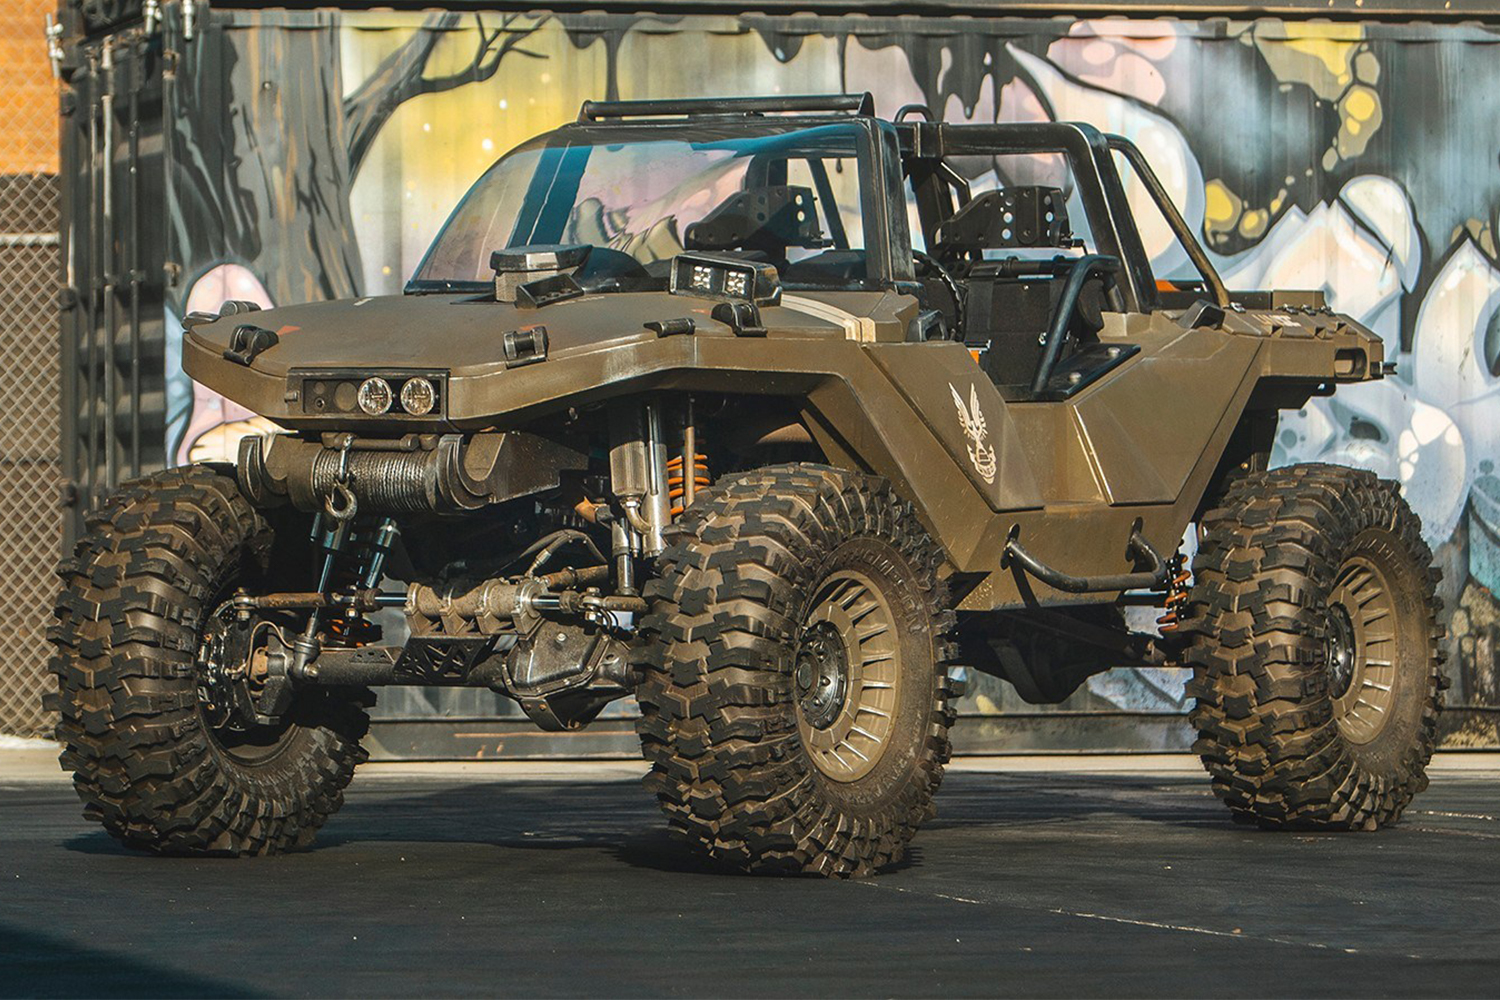 A real-life, working Warthog vehicle from the "Halo" video games sitting in a parking lot, designed and made by Ken Block's Hoonigan team